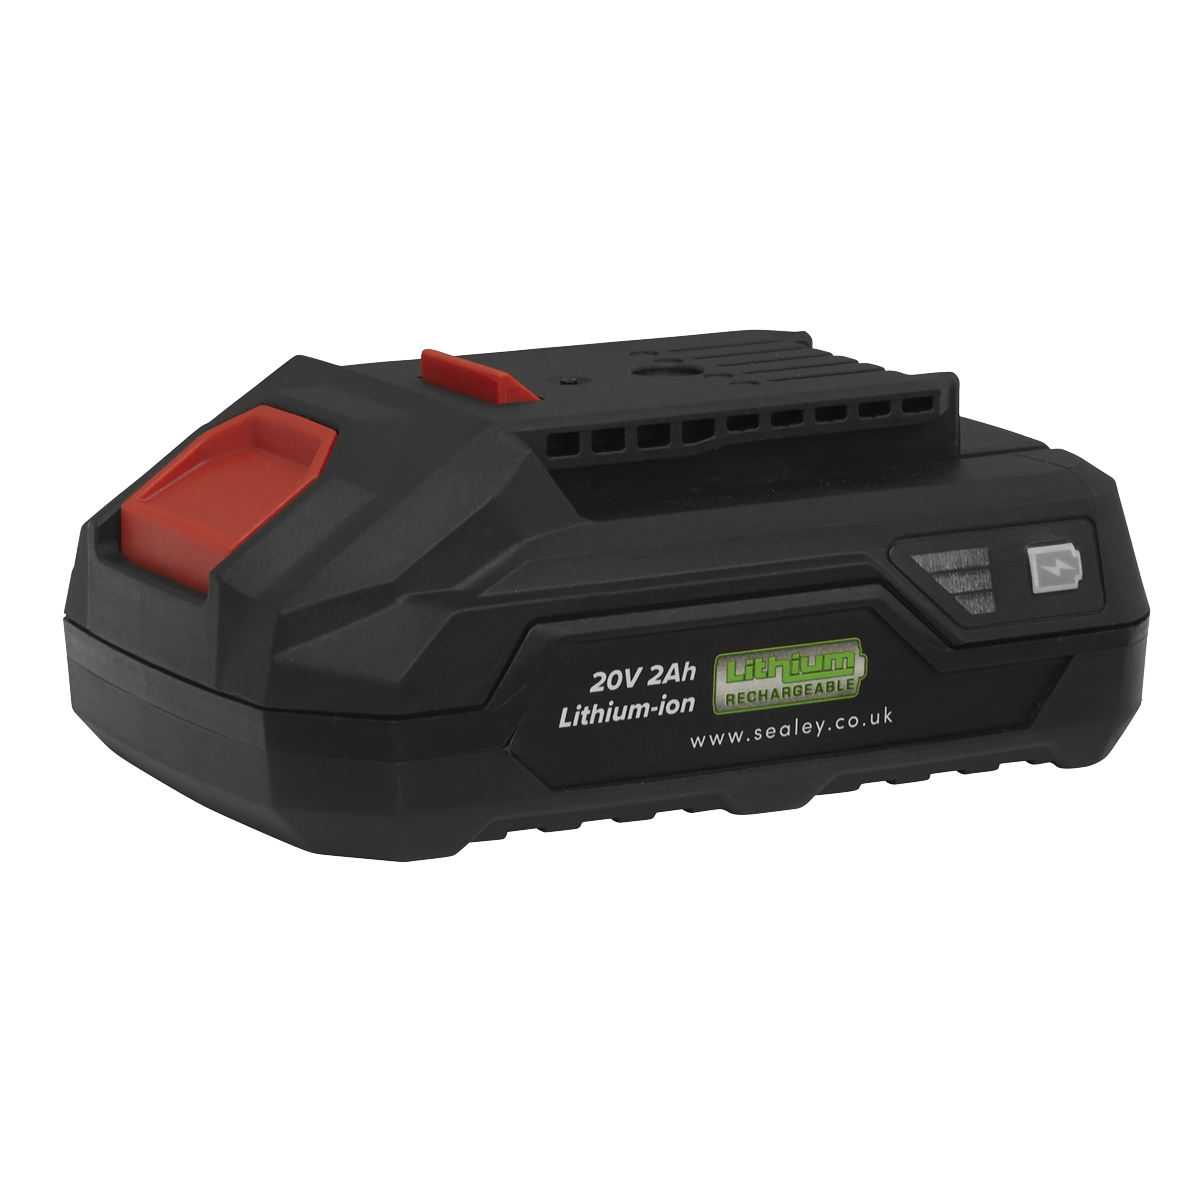 CP20VBP2 - Power Tool Battery 20V 2Ah Lithium-ion for CP20V Series